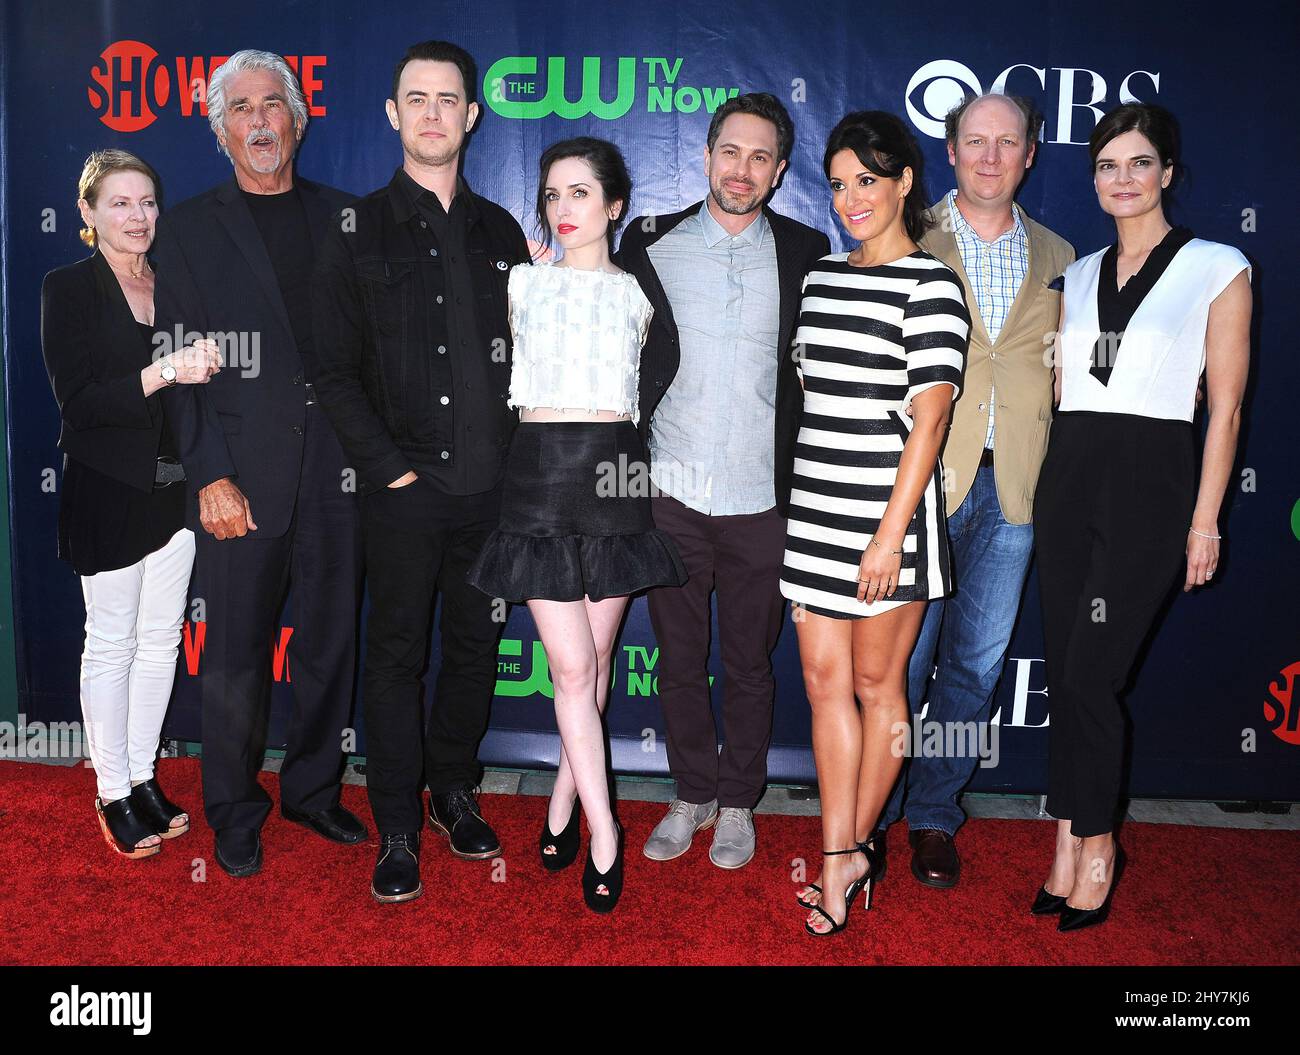 Dianne Wiest, James Brolin, Colin Hanks, Zoe Lister-Jones, Thomas Sadoski, Angelique Cabral, Dan Bakkedahl and Betsy Brandt attending the CBS, The CW and Showtime Summer TCA press tour. Stock Photo